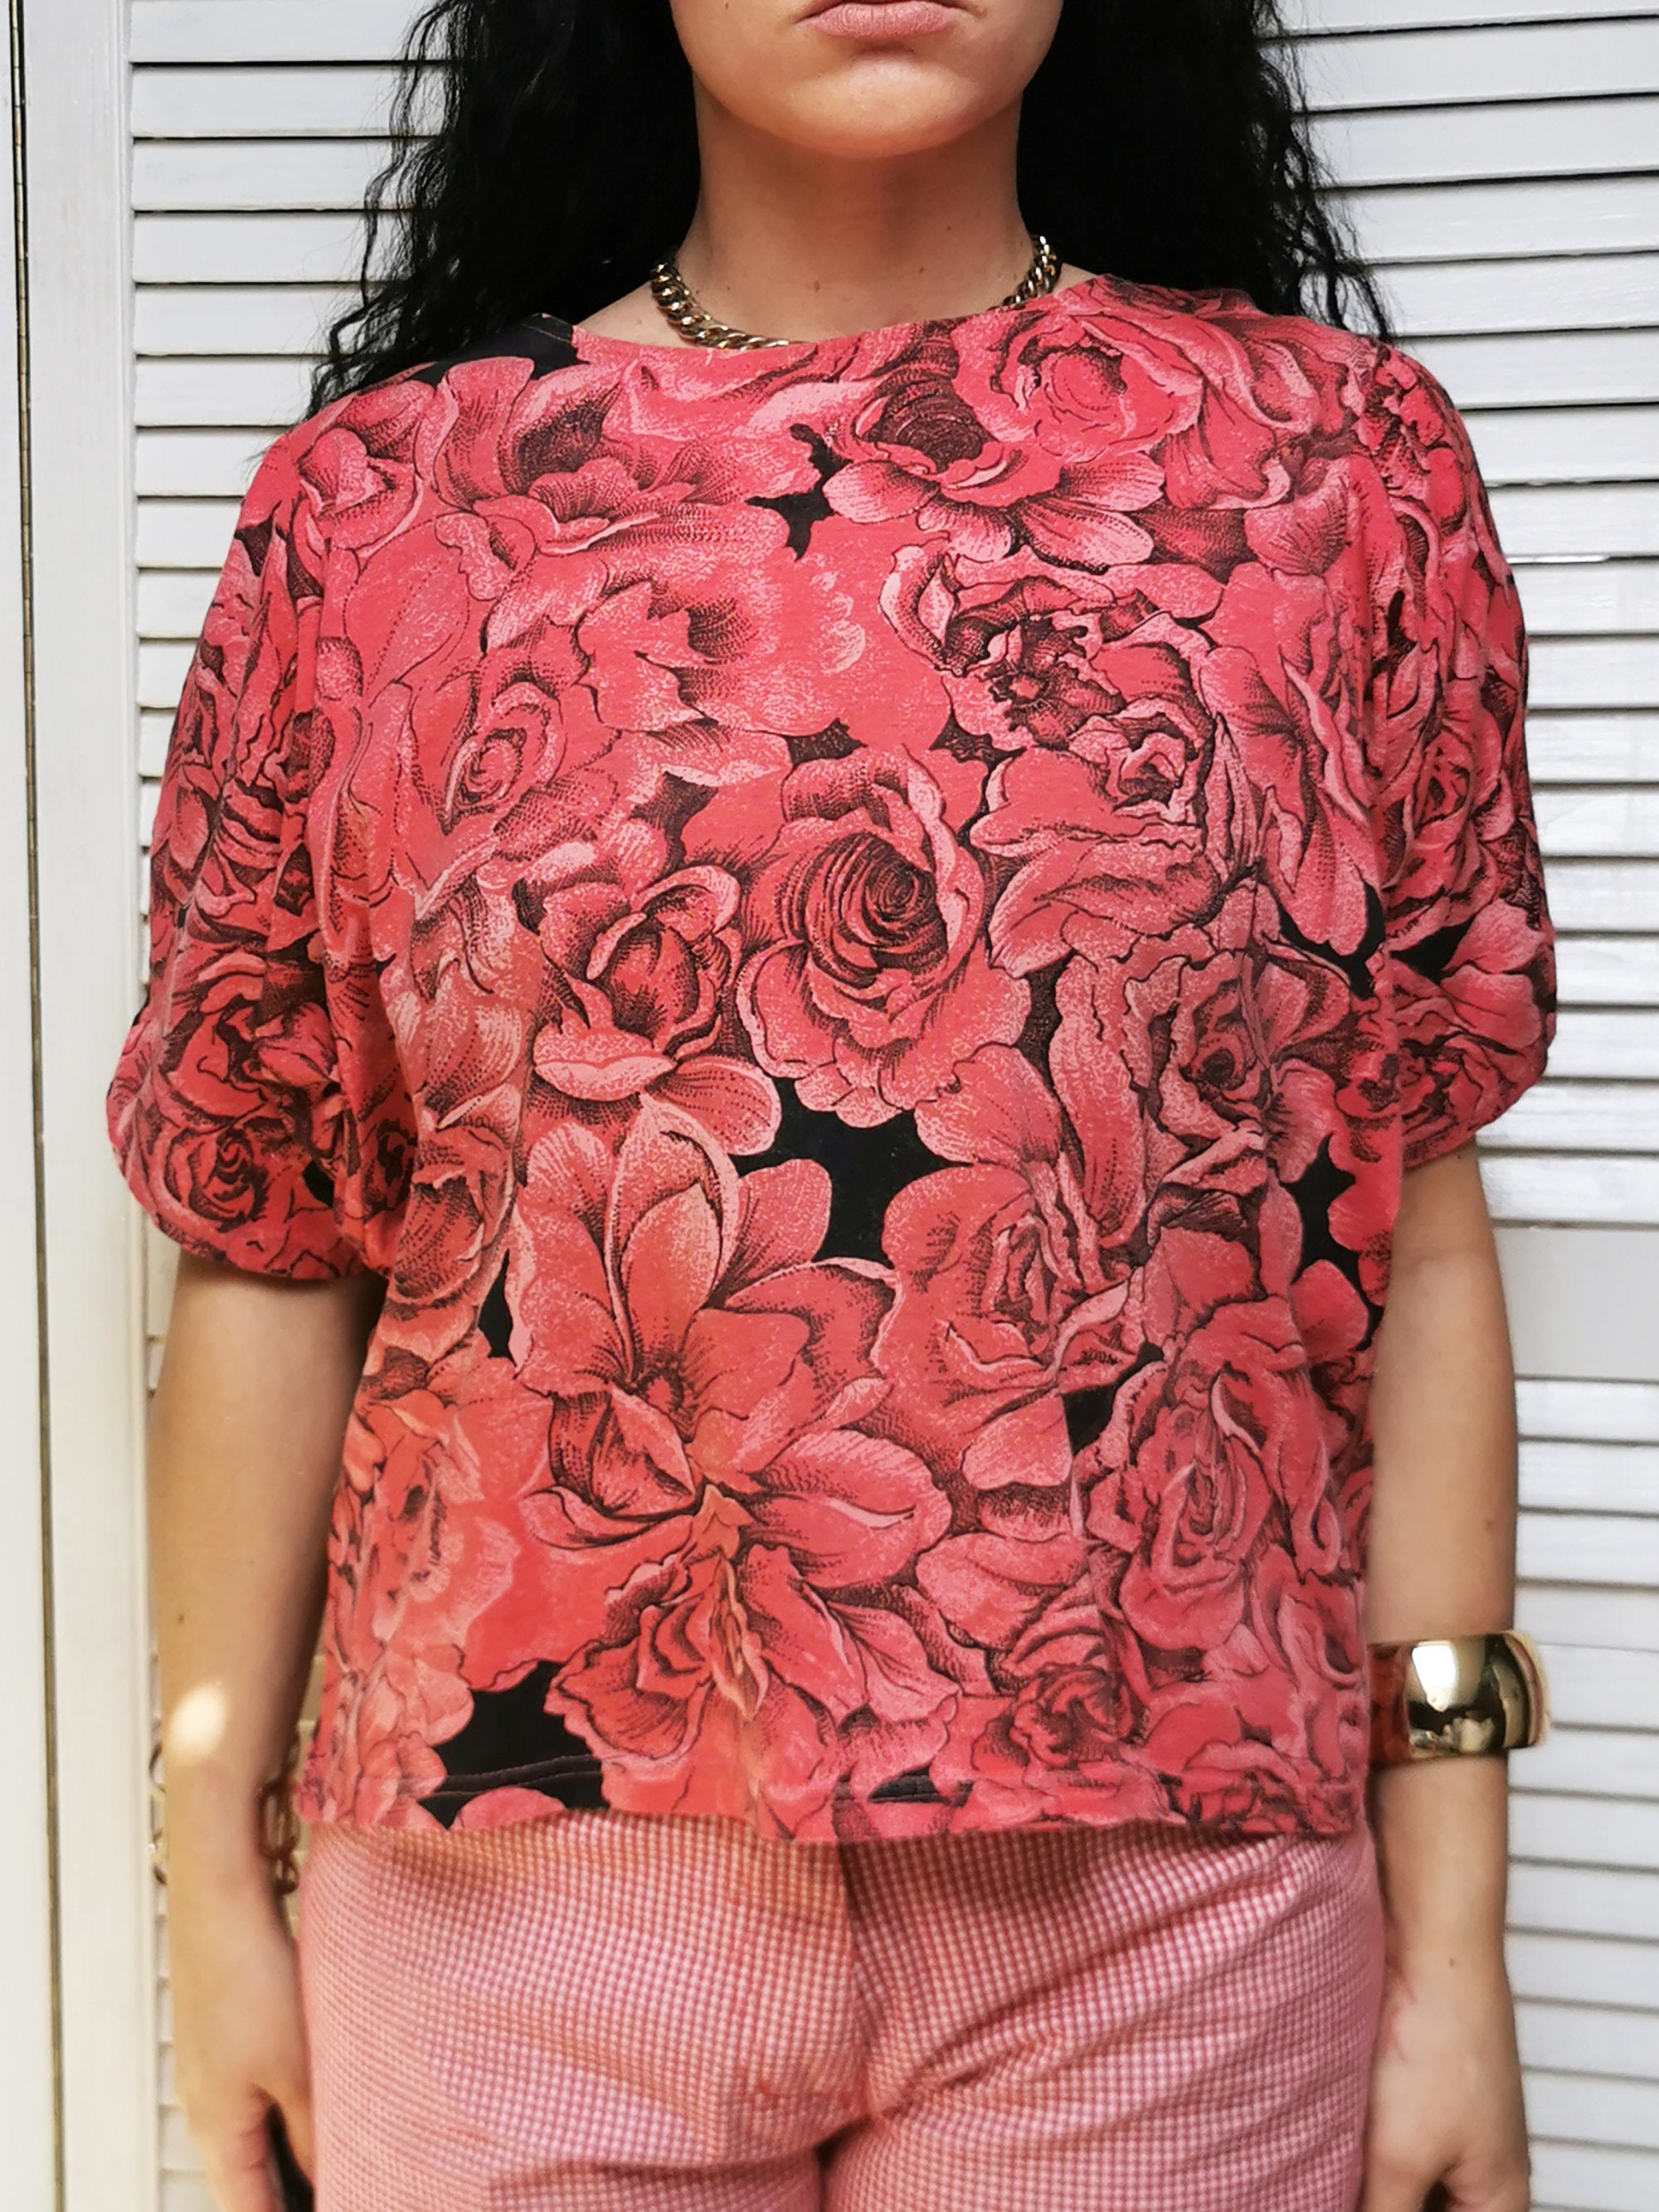 Vintage 80s red Roses print jersey blouse top